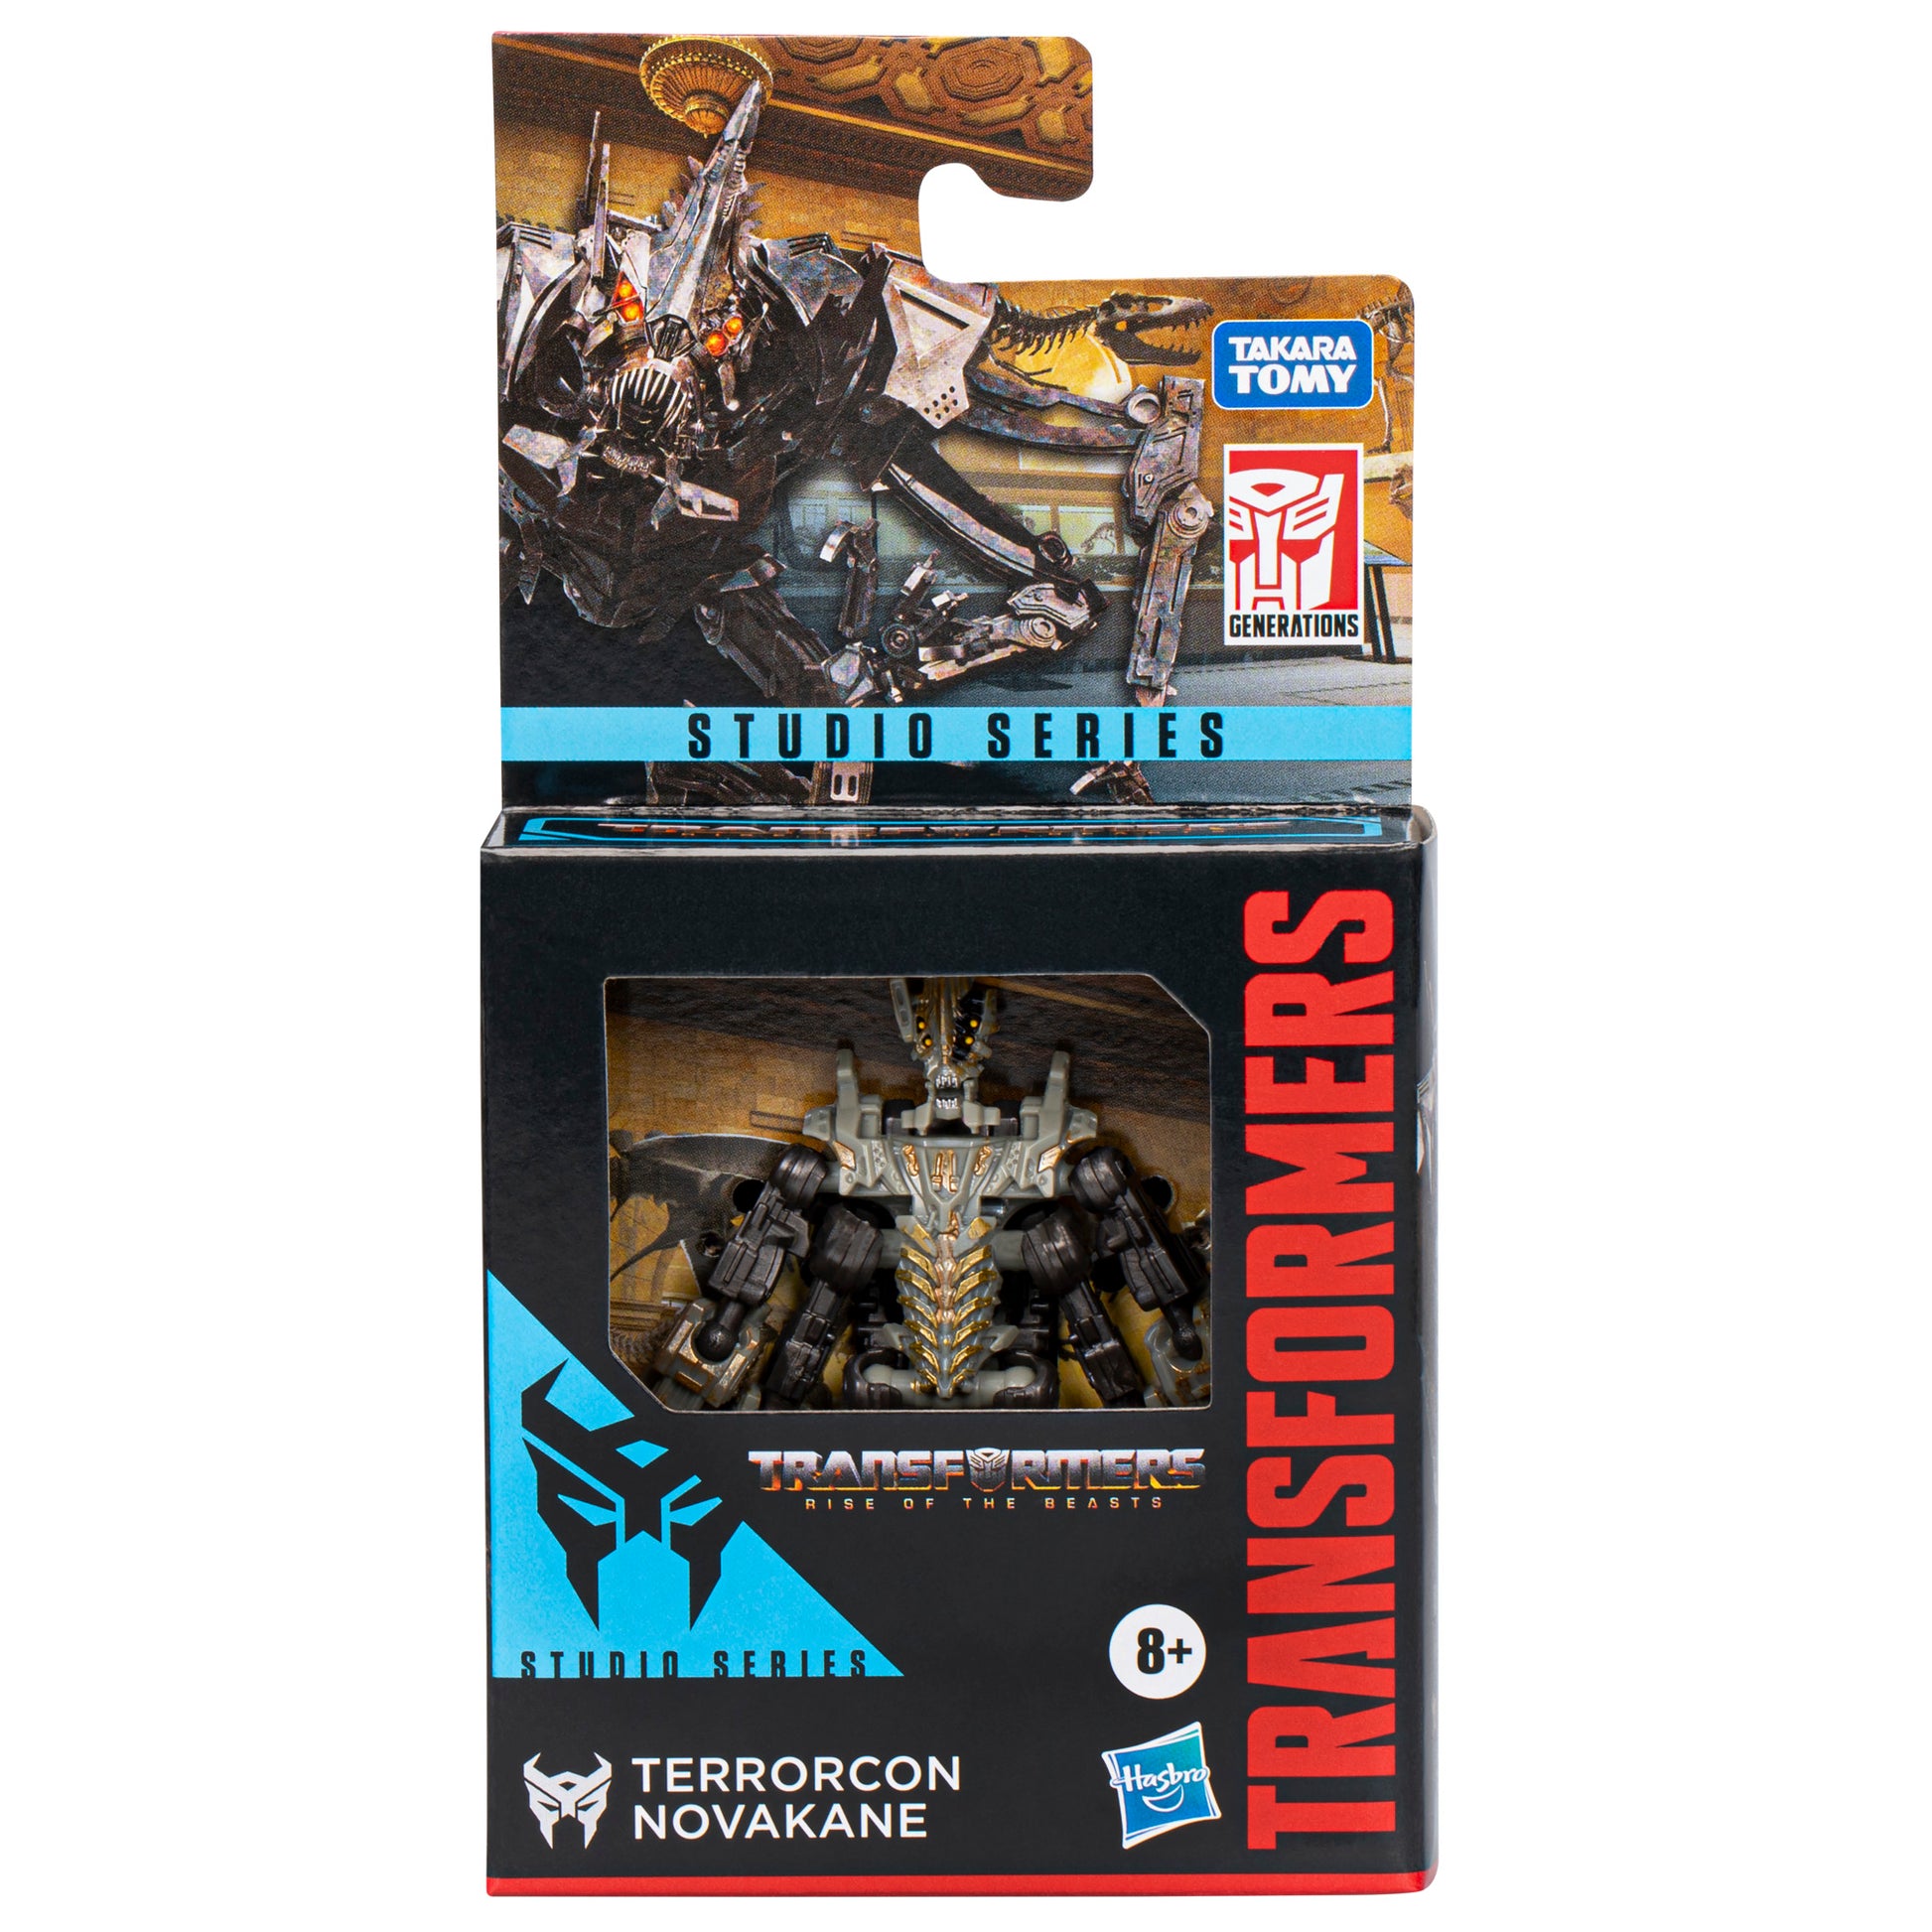 Transformers Toys Studio Series Transformers: Rise of the Beasts Terrorcon Novakane Toy, 3.5-inch, Action Figures For Boys And Girls Ages 8 and Up